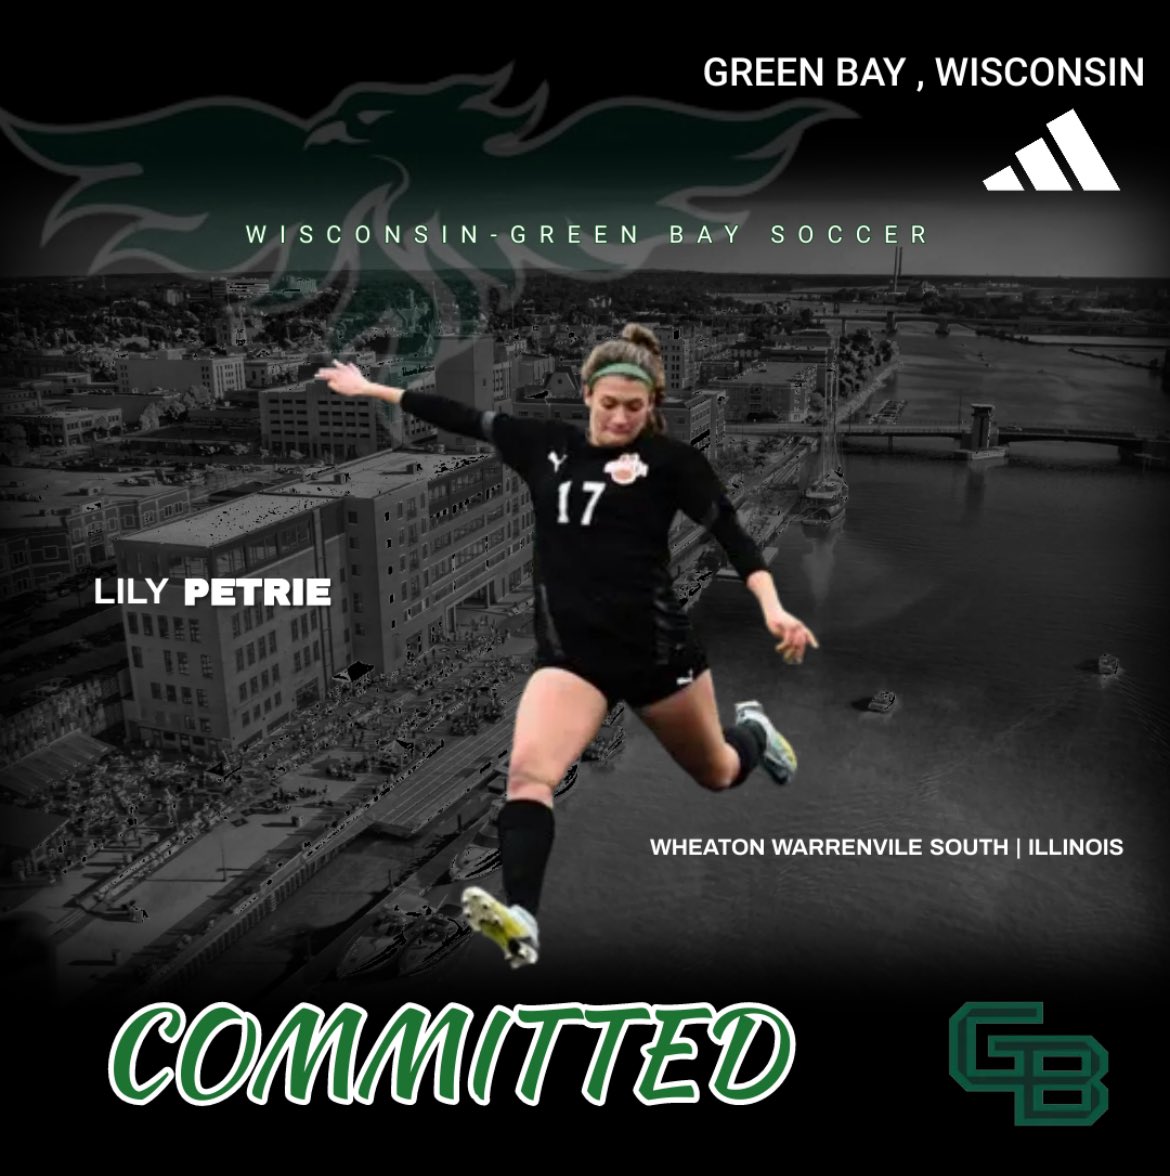 I am so Proud to announce my verbal commitment to play D1 soccer and continue my academic career at University Of Wisconsin-Green Bay! I would like to thank God, my family, friends, and all of the coaches that have supported me along the way! I would also like to thank the…